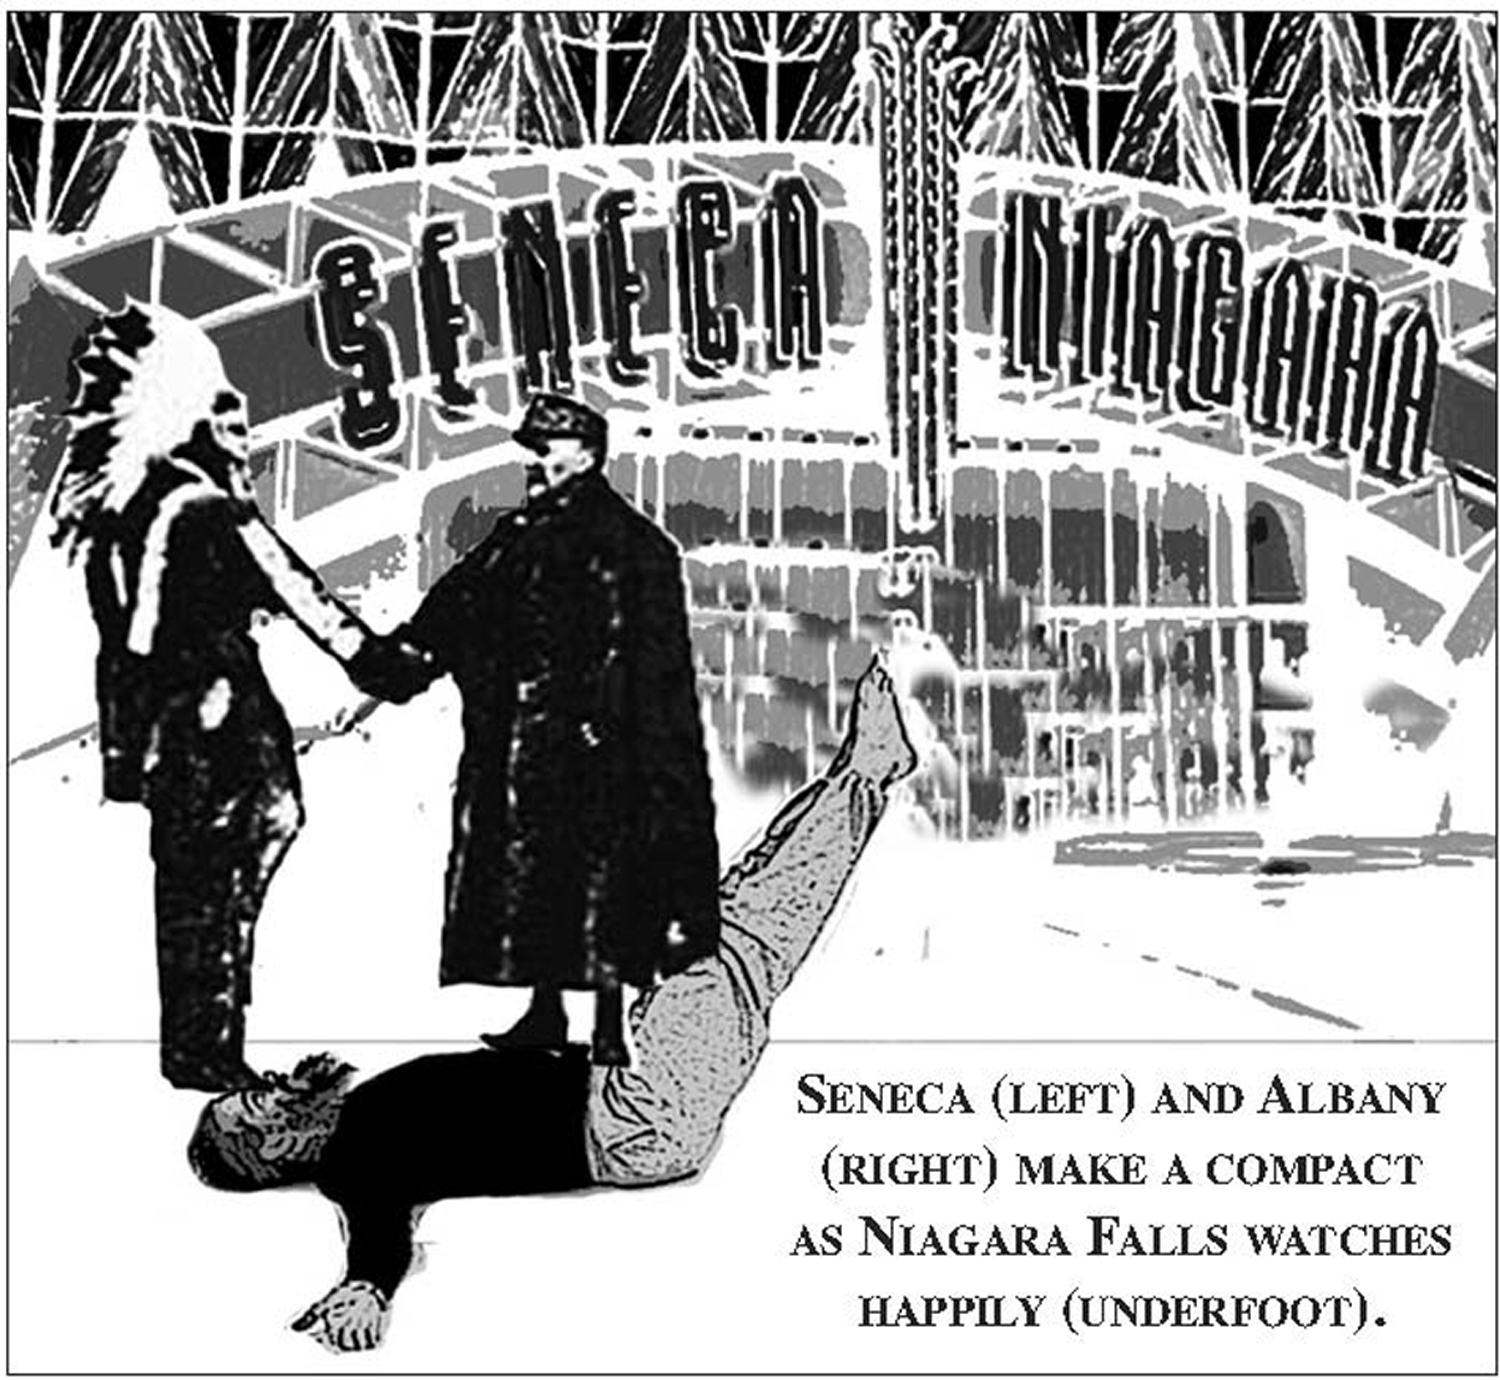 This egregiously politically incorrect cartoon was published back in 2006 to demonstrate the inequities of the Seneca compact with New York State which punished Niagara Falls as it enriches Albany and the Seneca by allowing a group of people by race to operate tax free while dumb Americans who live in Niagara Falls pay the highest taxes in the highest taxed state in America! Where are our elected leaders in opposing this?